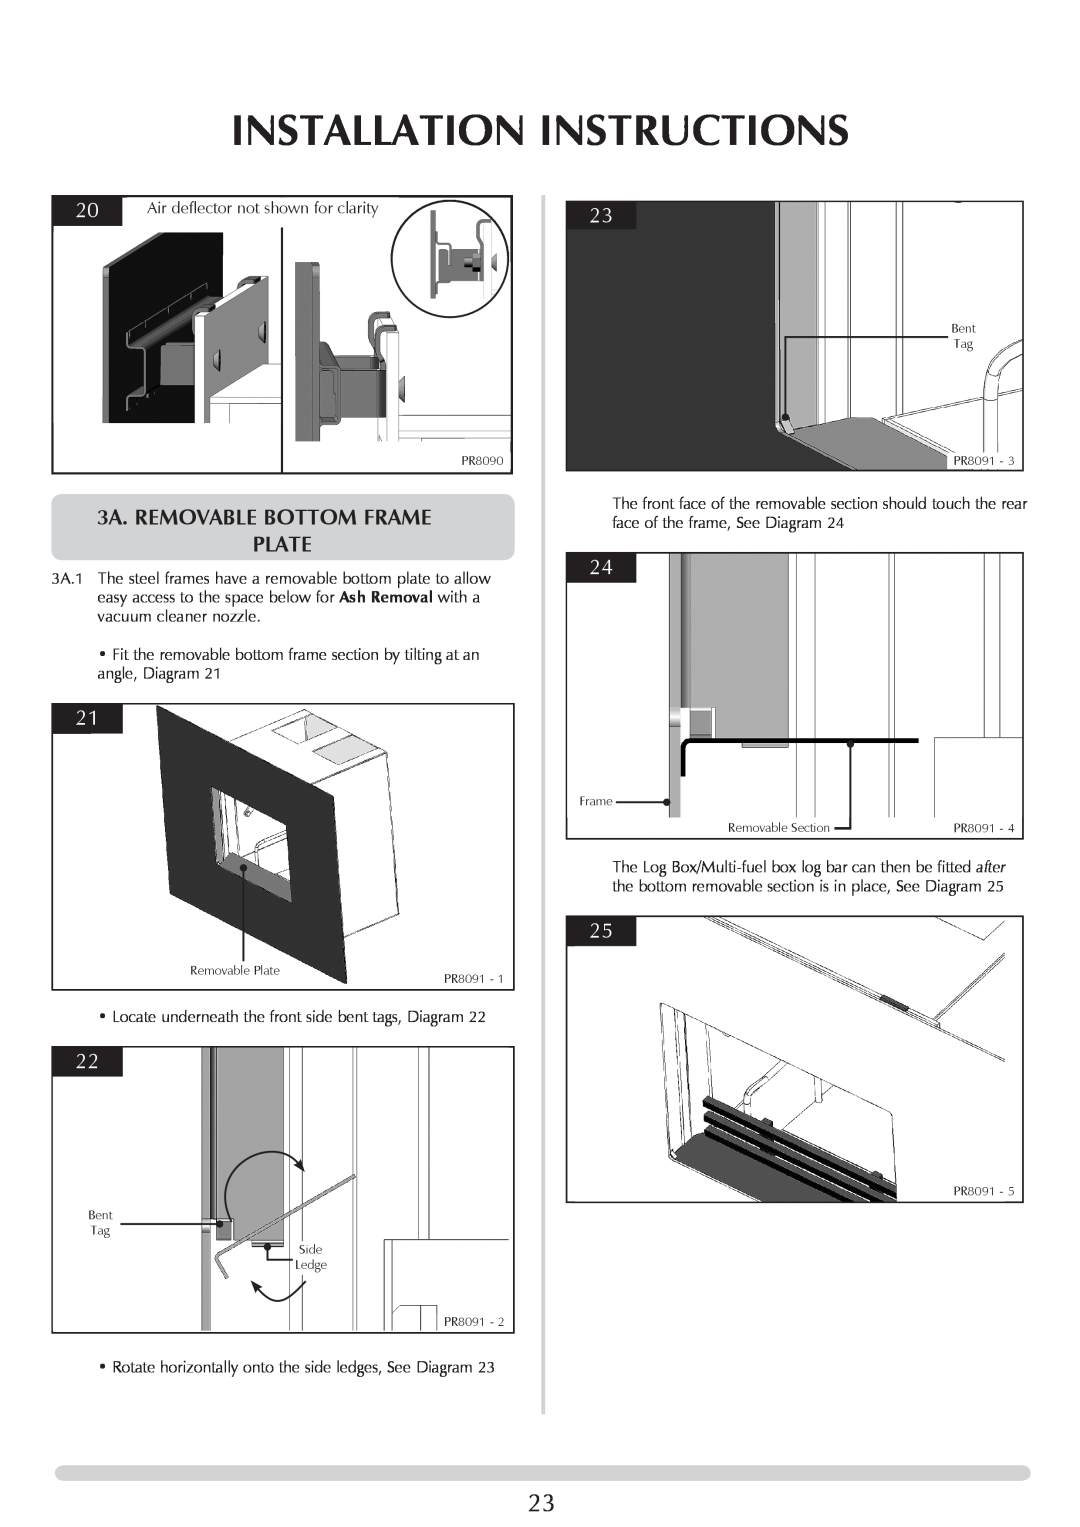 Stovax Open Log Burning Convector Fireboxes manual 3A. Removable bottom Frame plate, Installation Instructions 